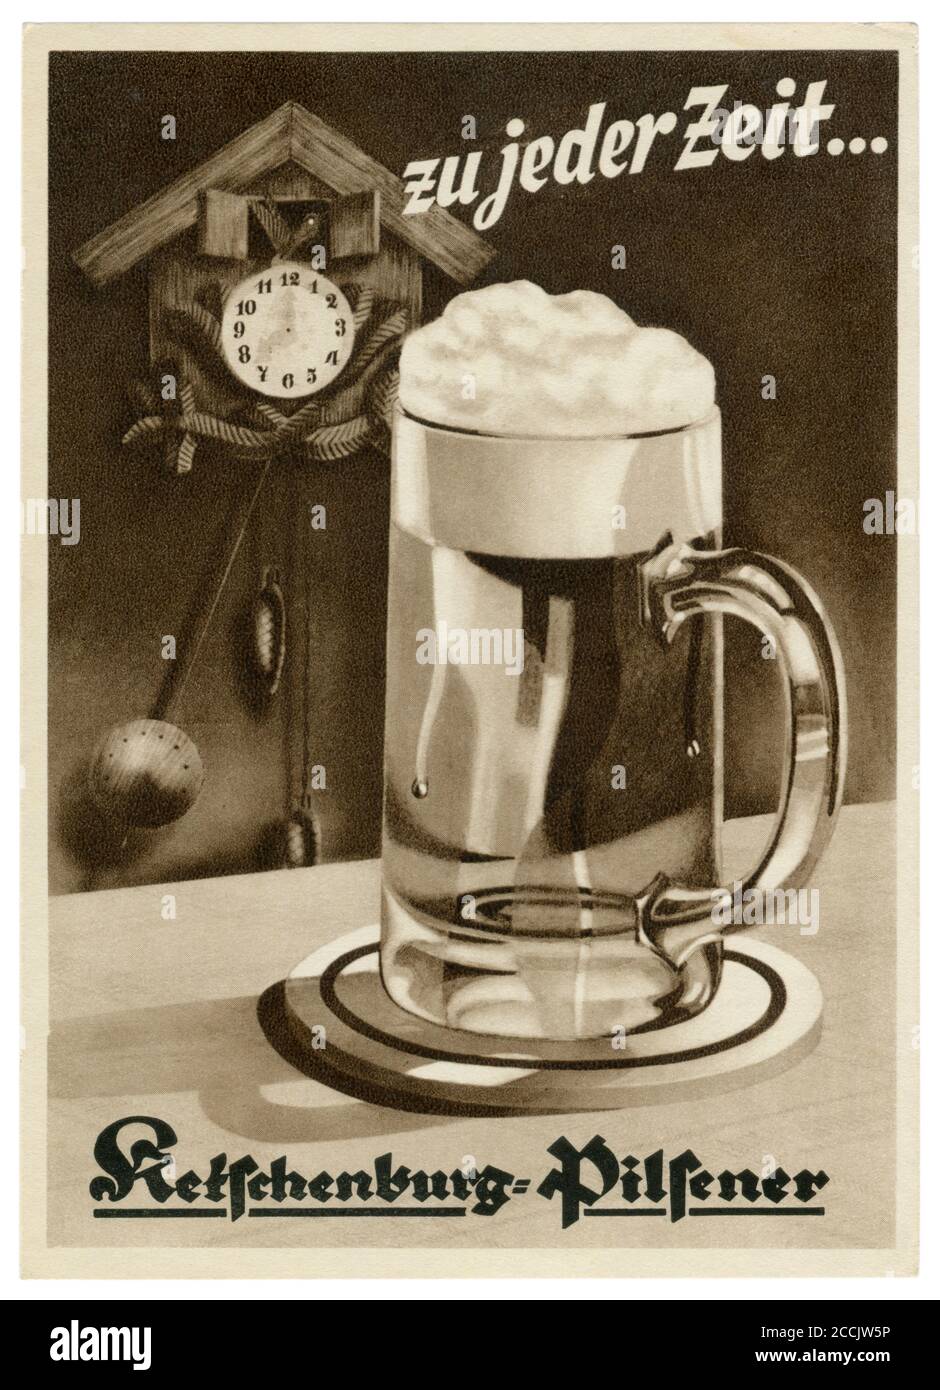 German historical postcard: at any time... Ketschenburg Pilsner. vintage ads. A glass of light frothy beer on the background of a cuckoo clock. Stock Photo